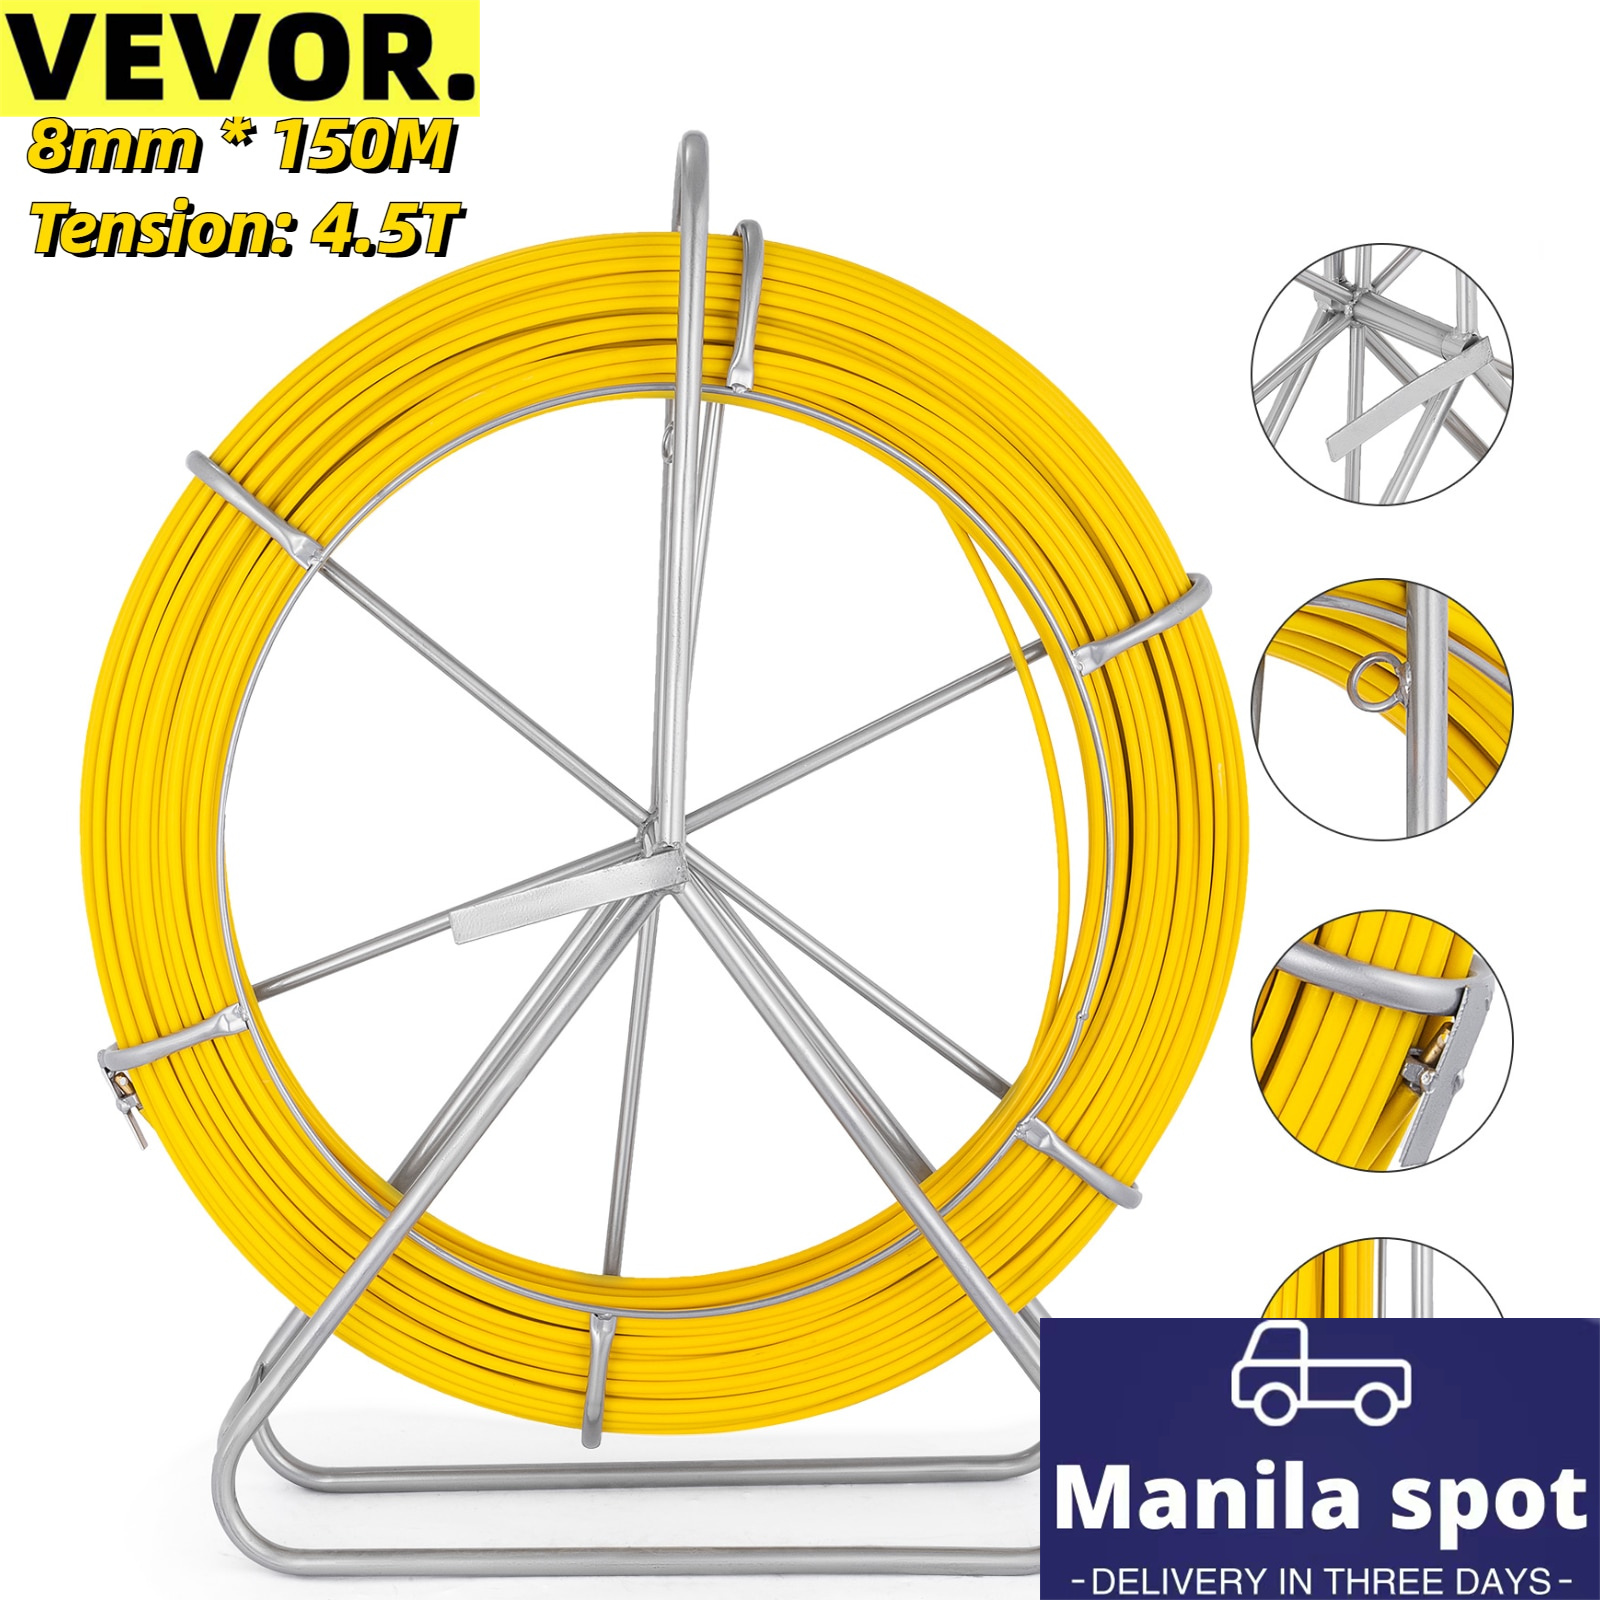 VEVOR 8Mm X 150M Fiberglass Wire Running Cable Duct Rodder Fish